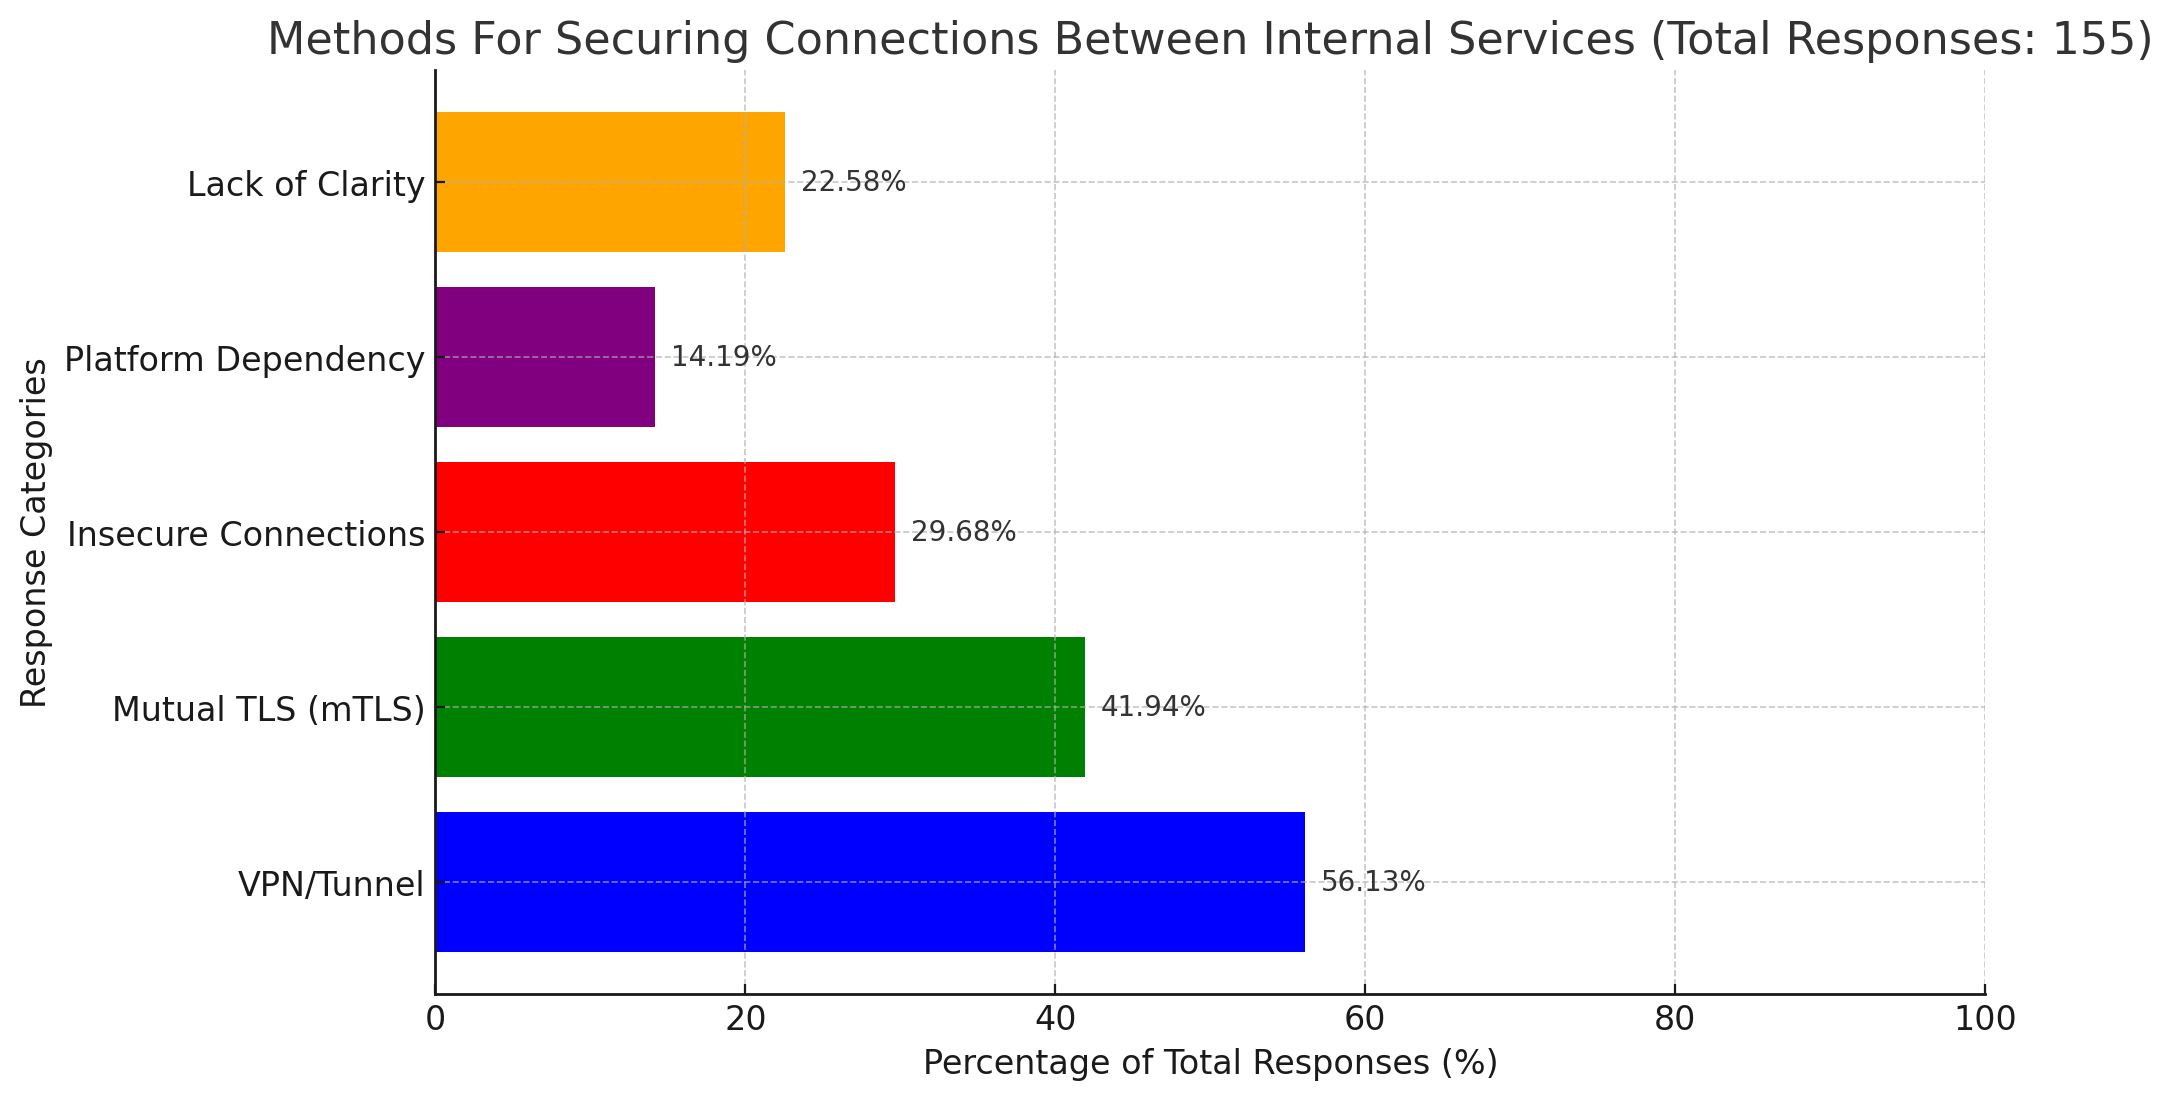 Methods For Securing Connections Between Internal Services